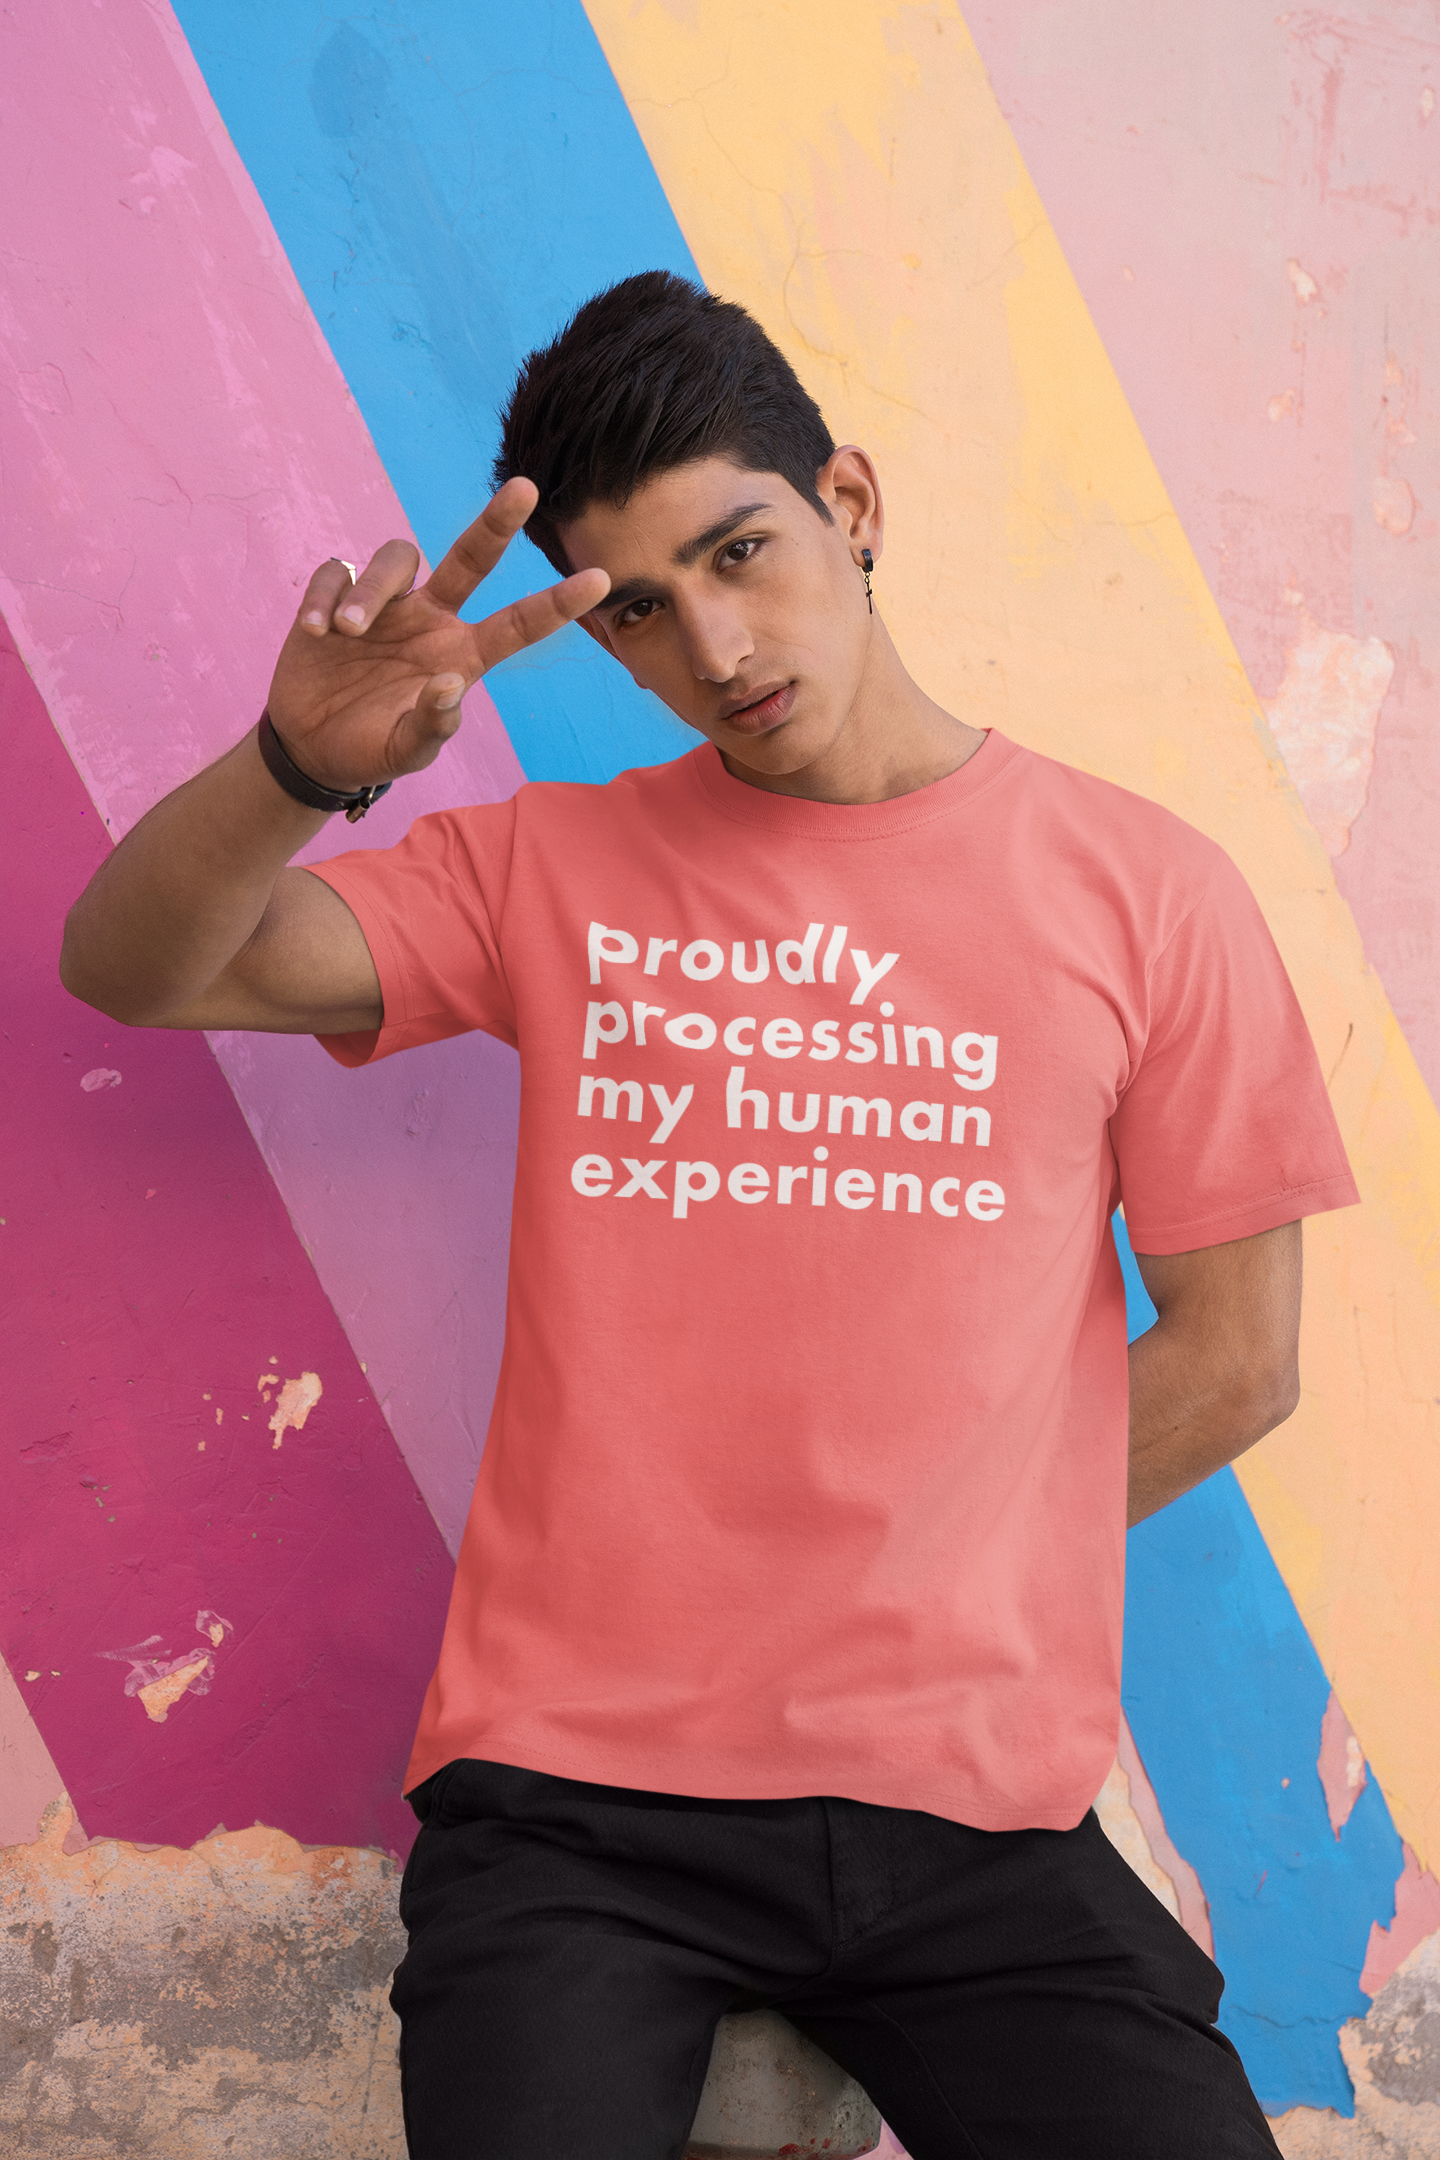 gildan-tee-mockup-of-a-serious-man-doing-the-peace-sign-with-his-hand-m31927.png